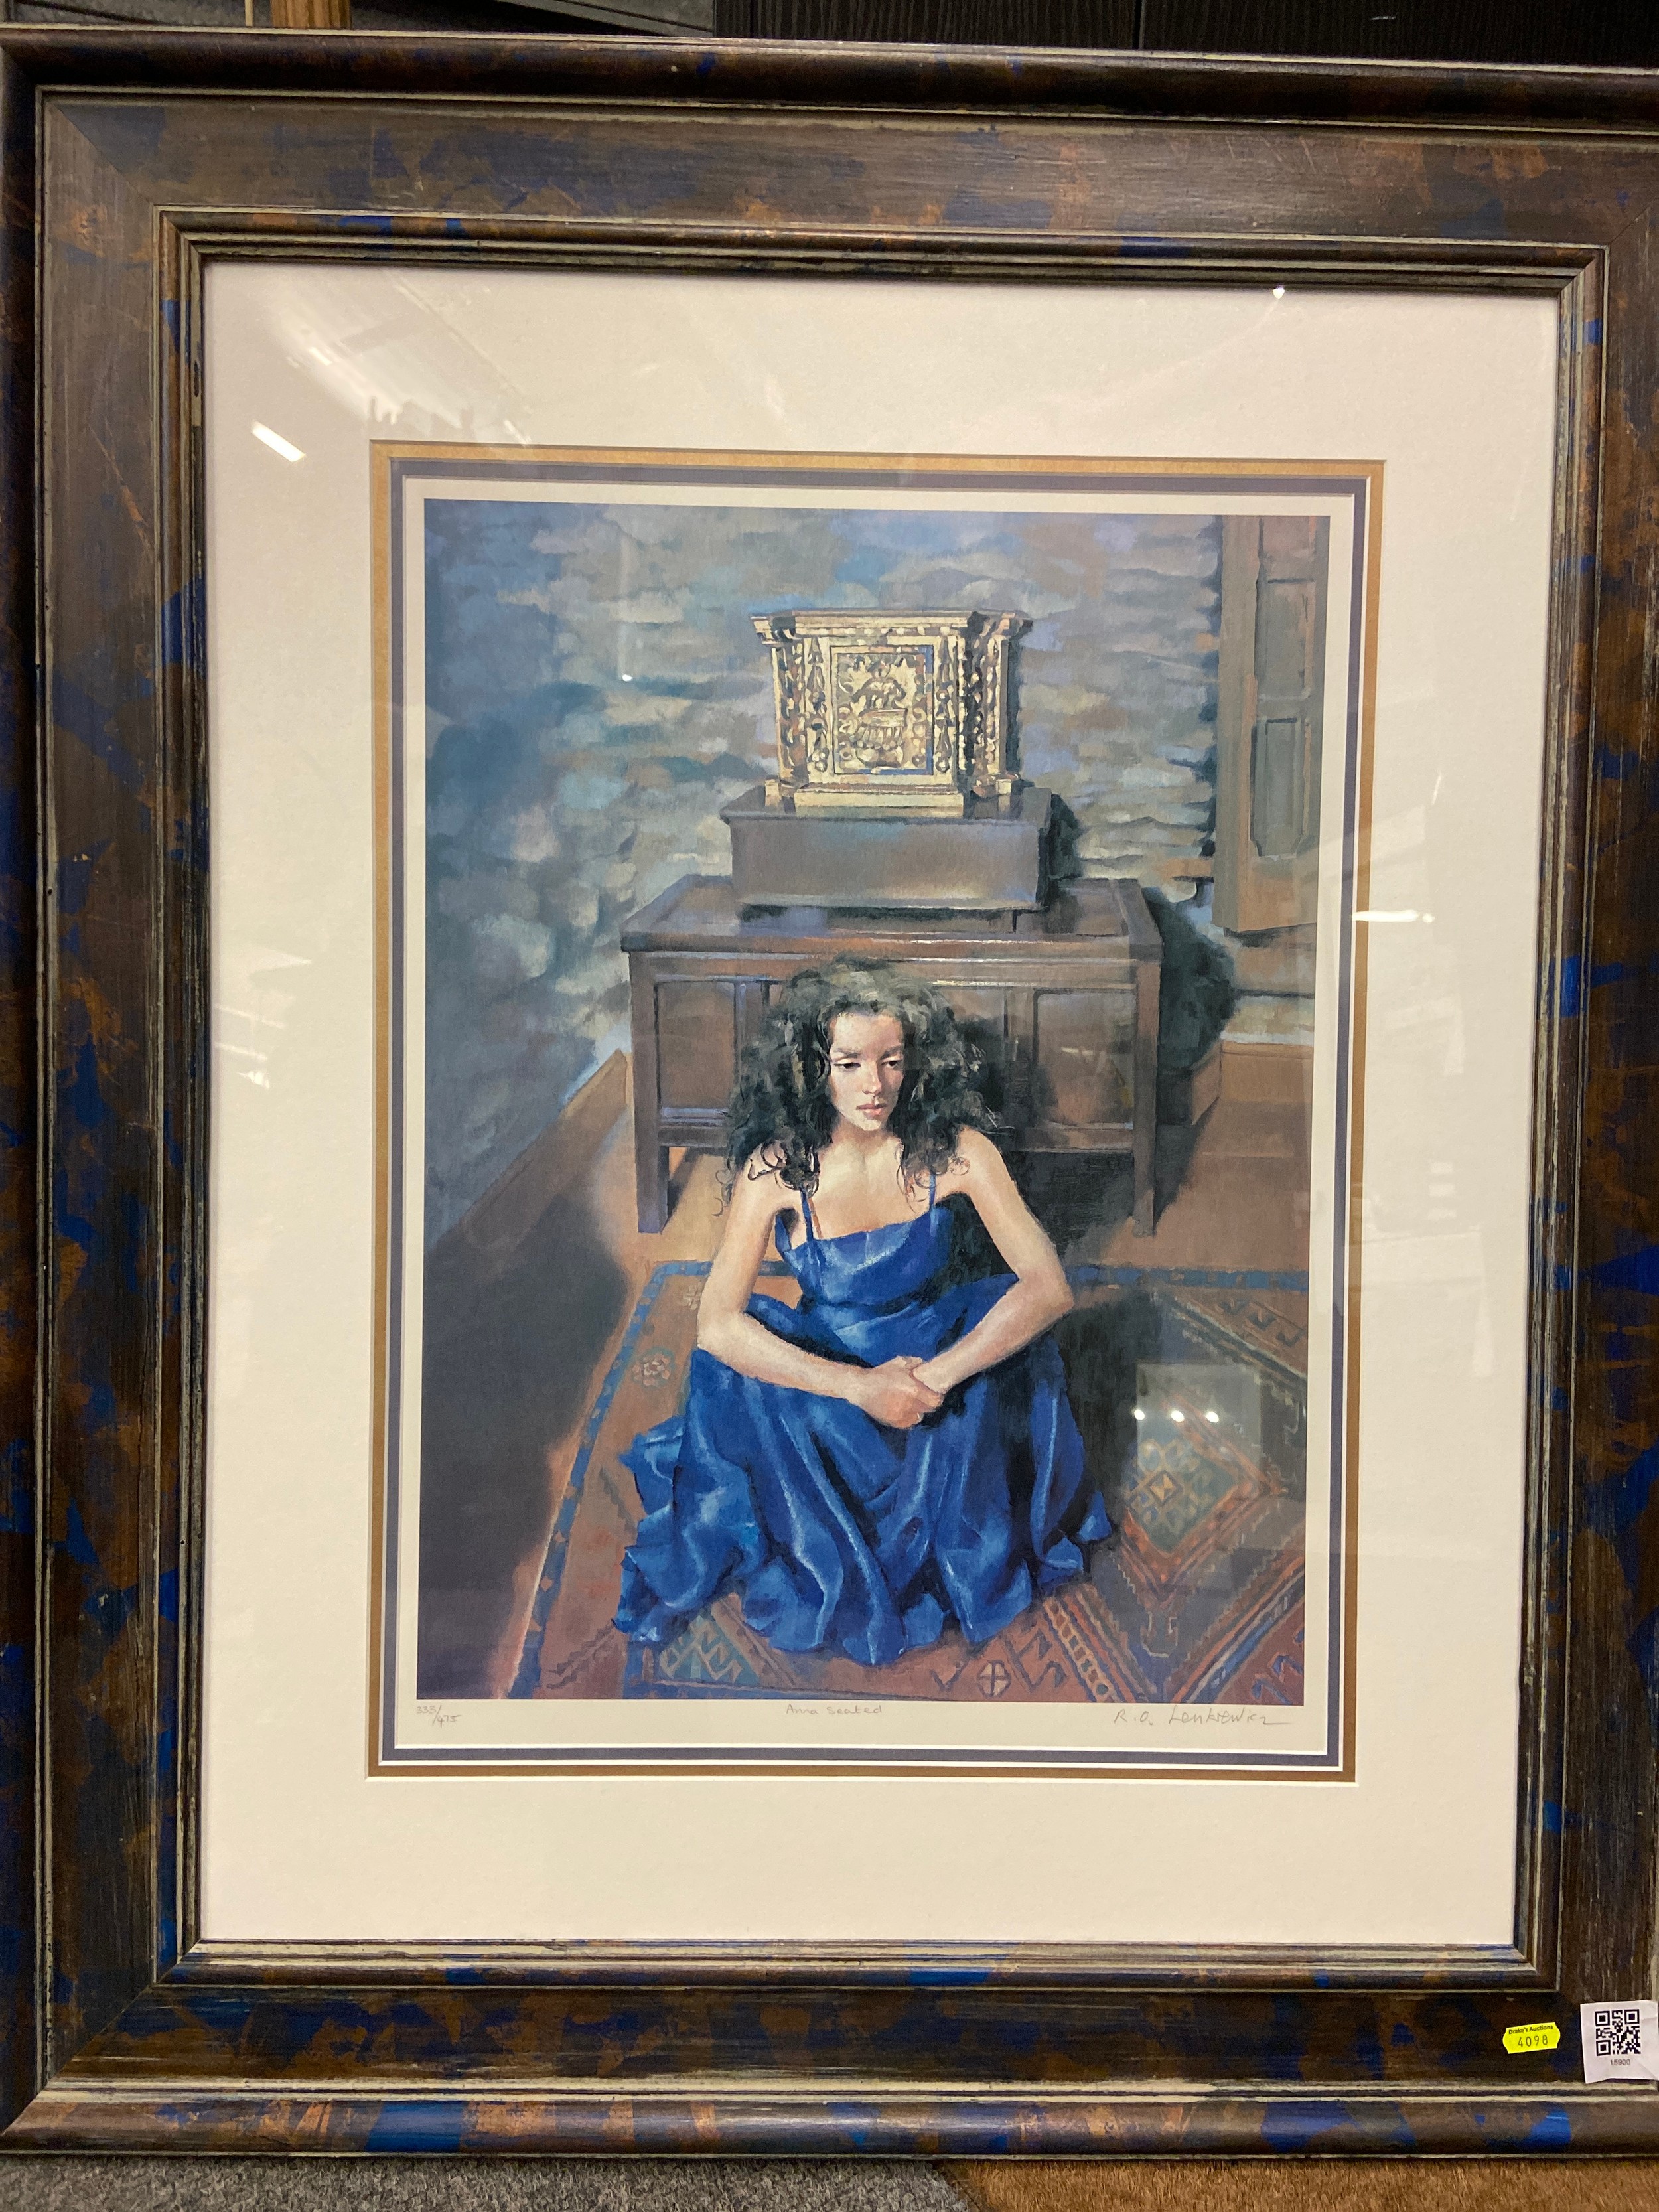 Robert Lenkiewicz 'Anna Seated' signed limited edition print 833/475 with certificate of authenticit